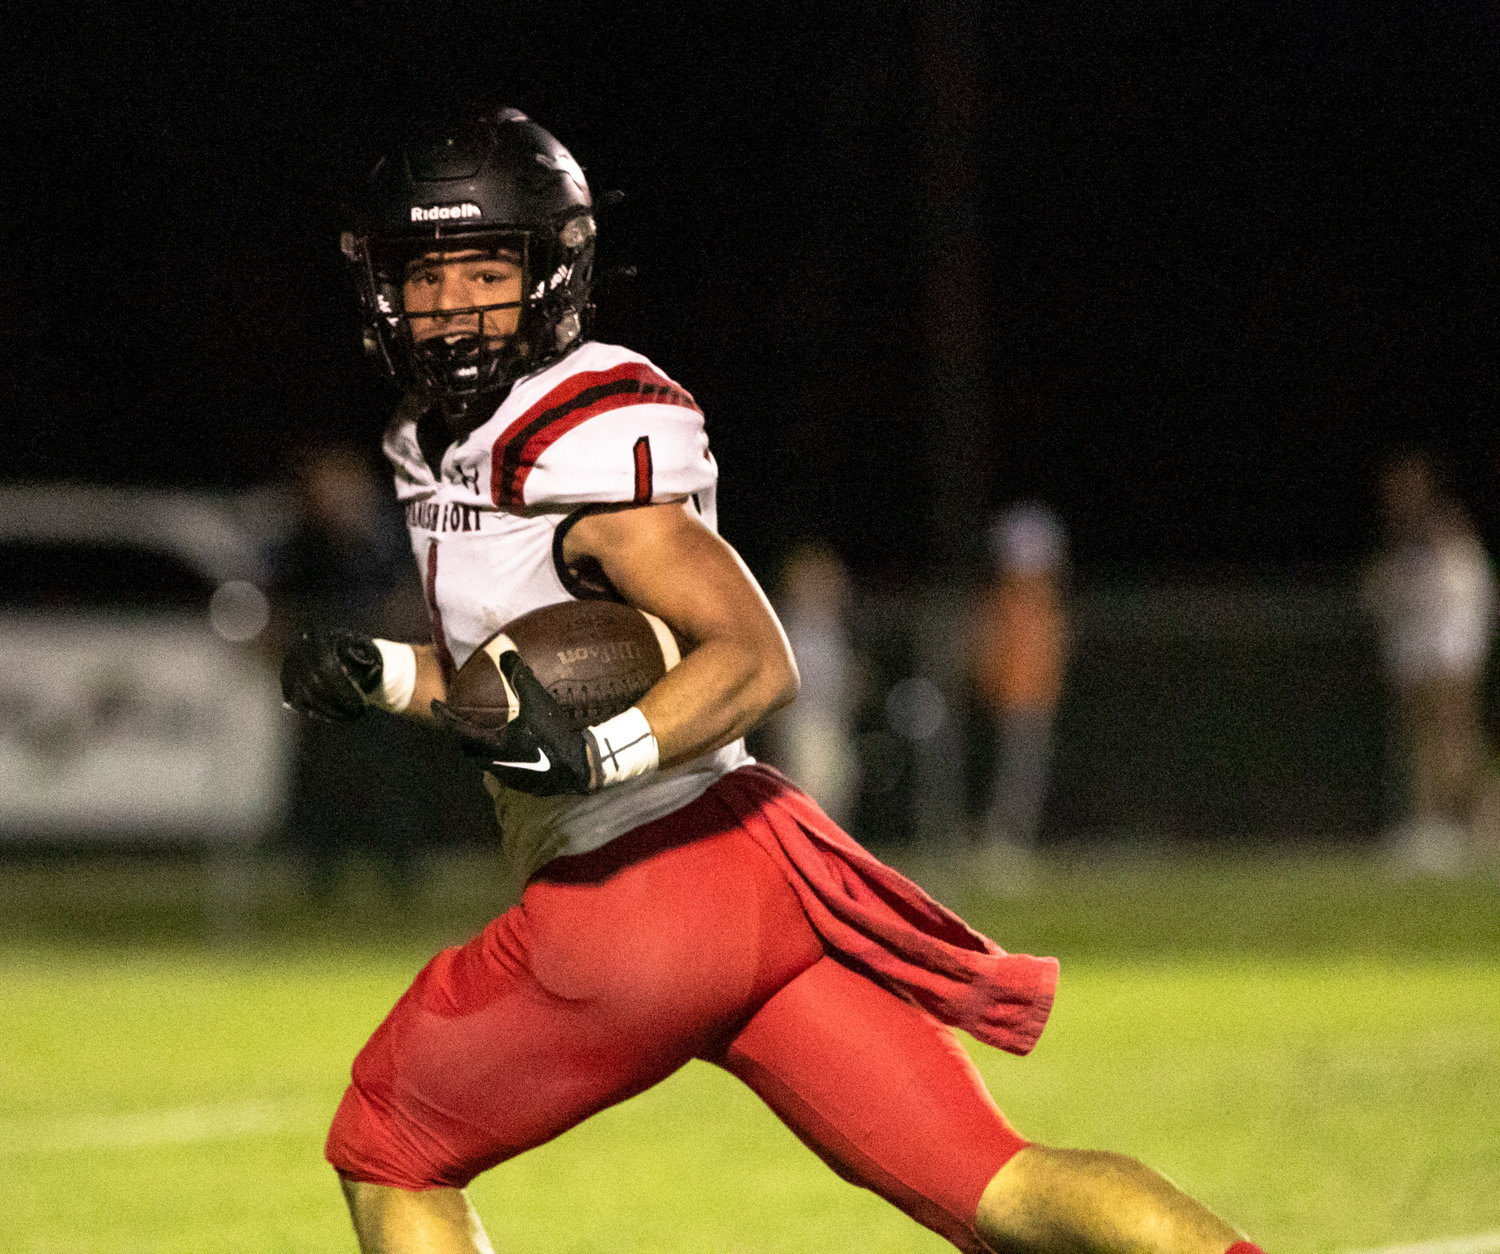 Toro senior receiver Jacob Godfrey checks to find no defenders in his vicinity after he juked the last line of Robertsdale defenders on his 37-yard touchdown in the second quarter of Spanish Fort’s 42-13 win over the Golden Bears in region play Friday night.